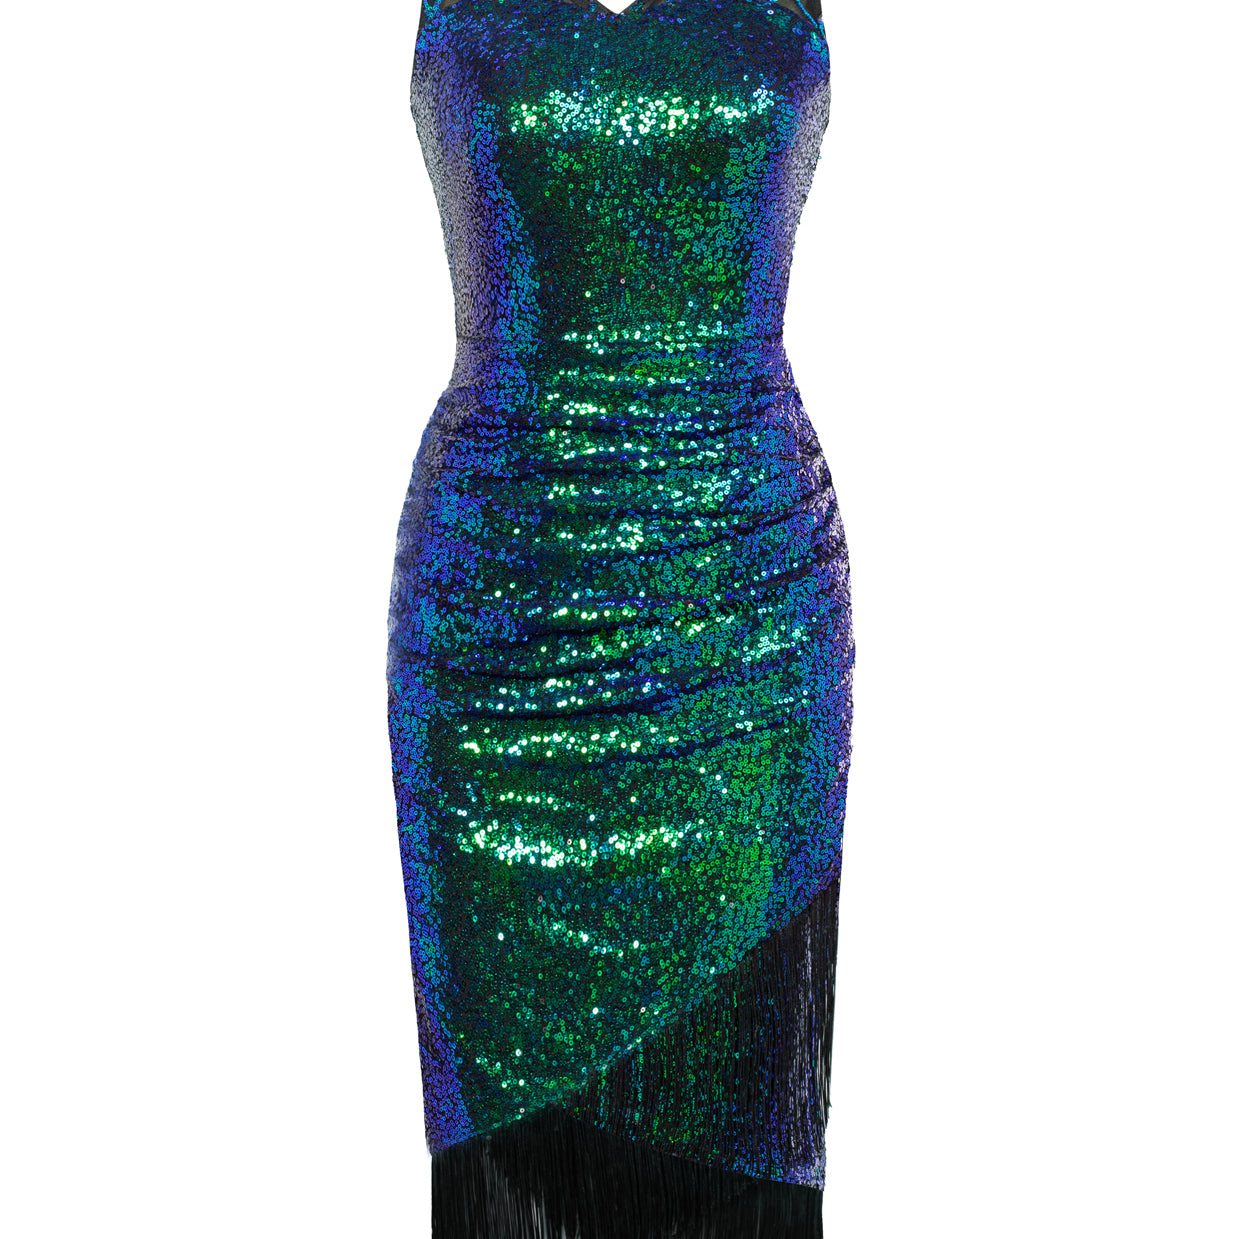 Seckill Offer⌛Sequin Dress Simple 1920s Flapper Cocktail Party Dresses